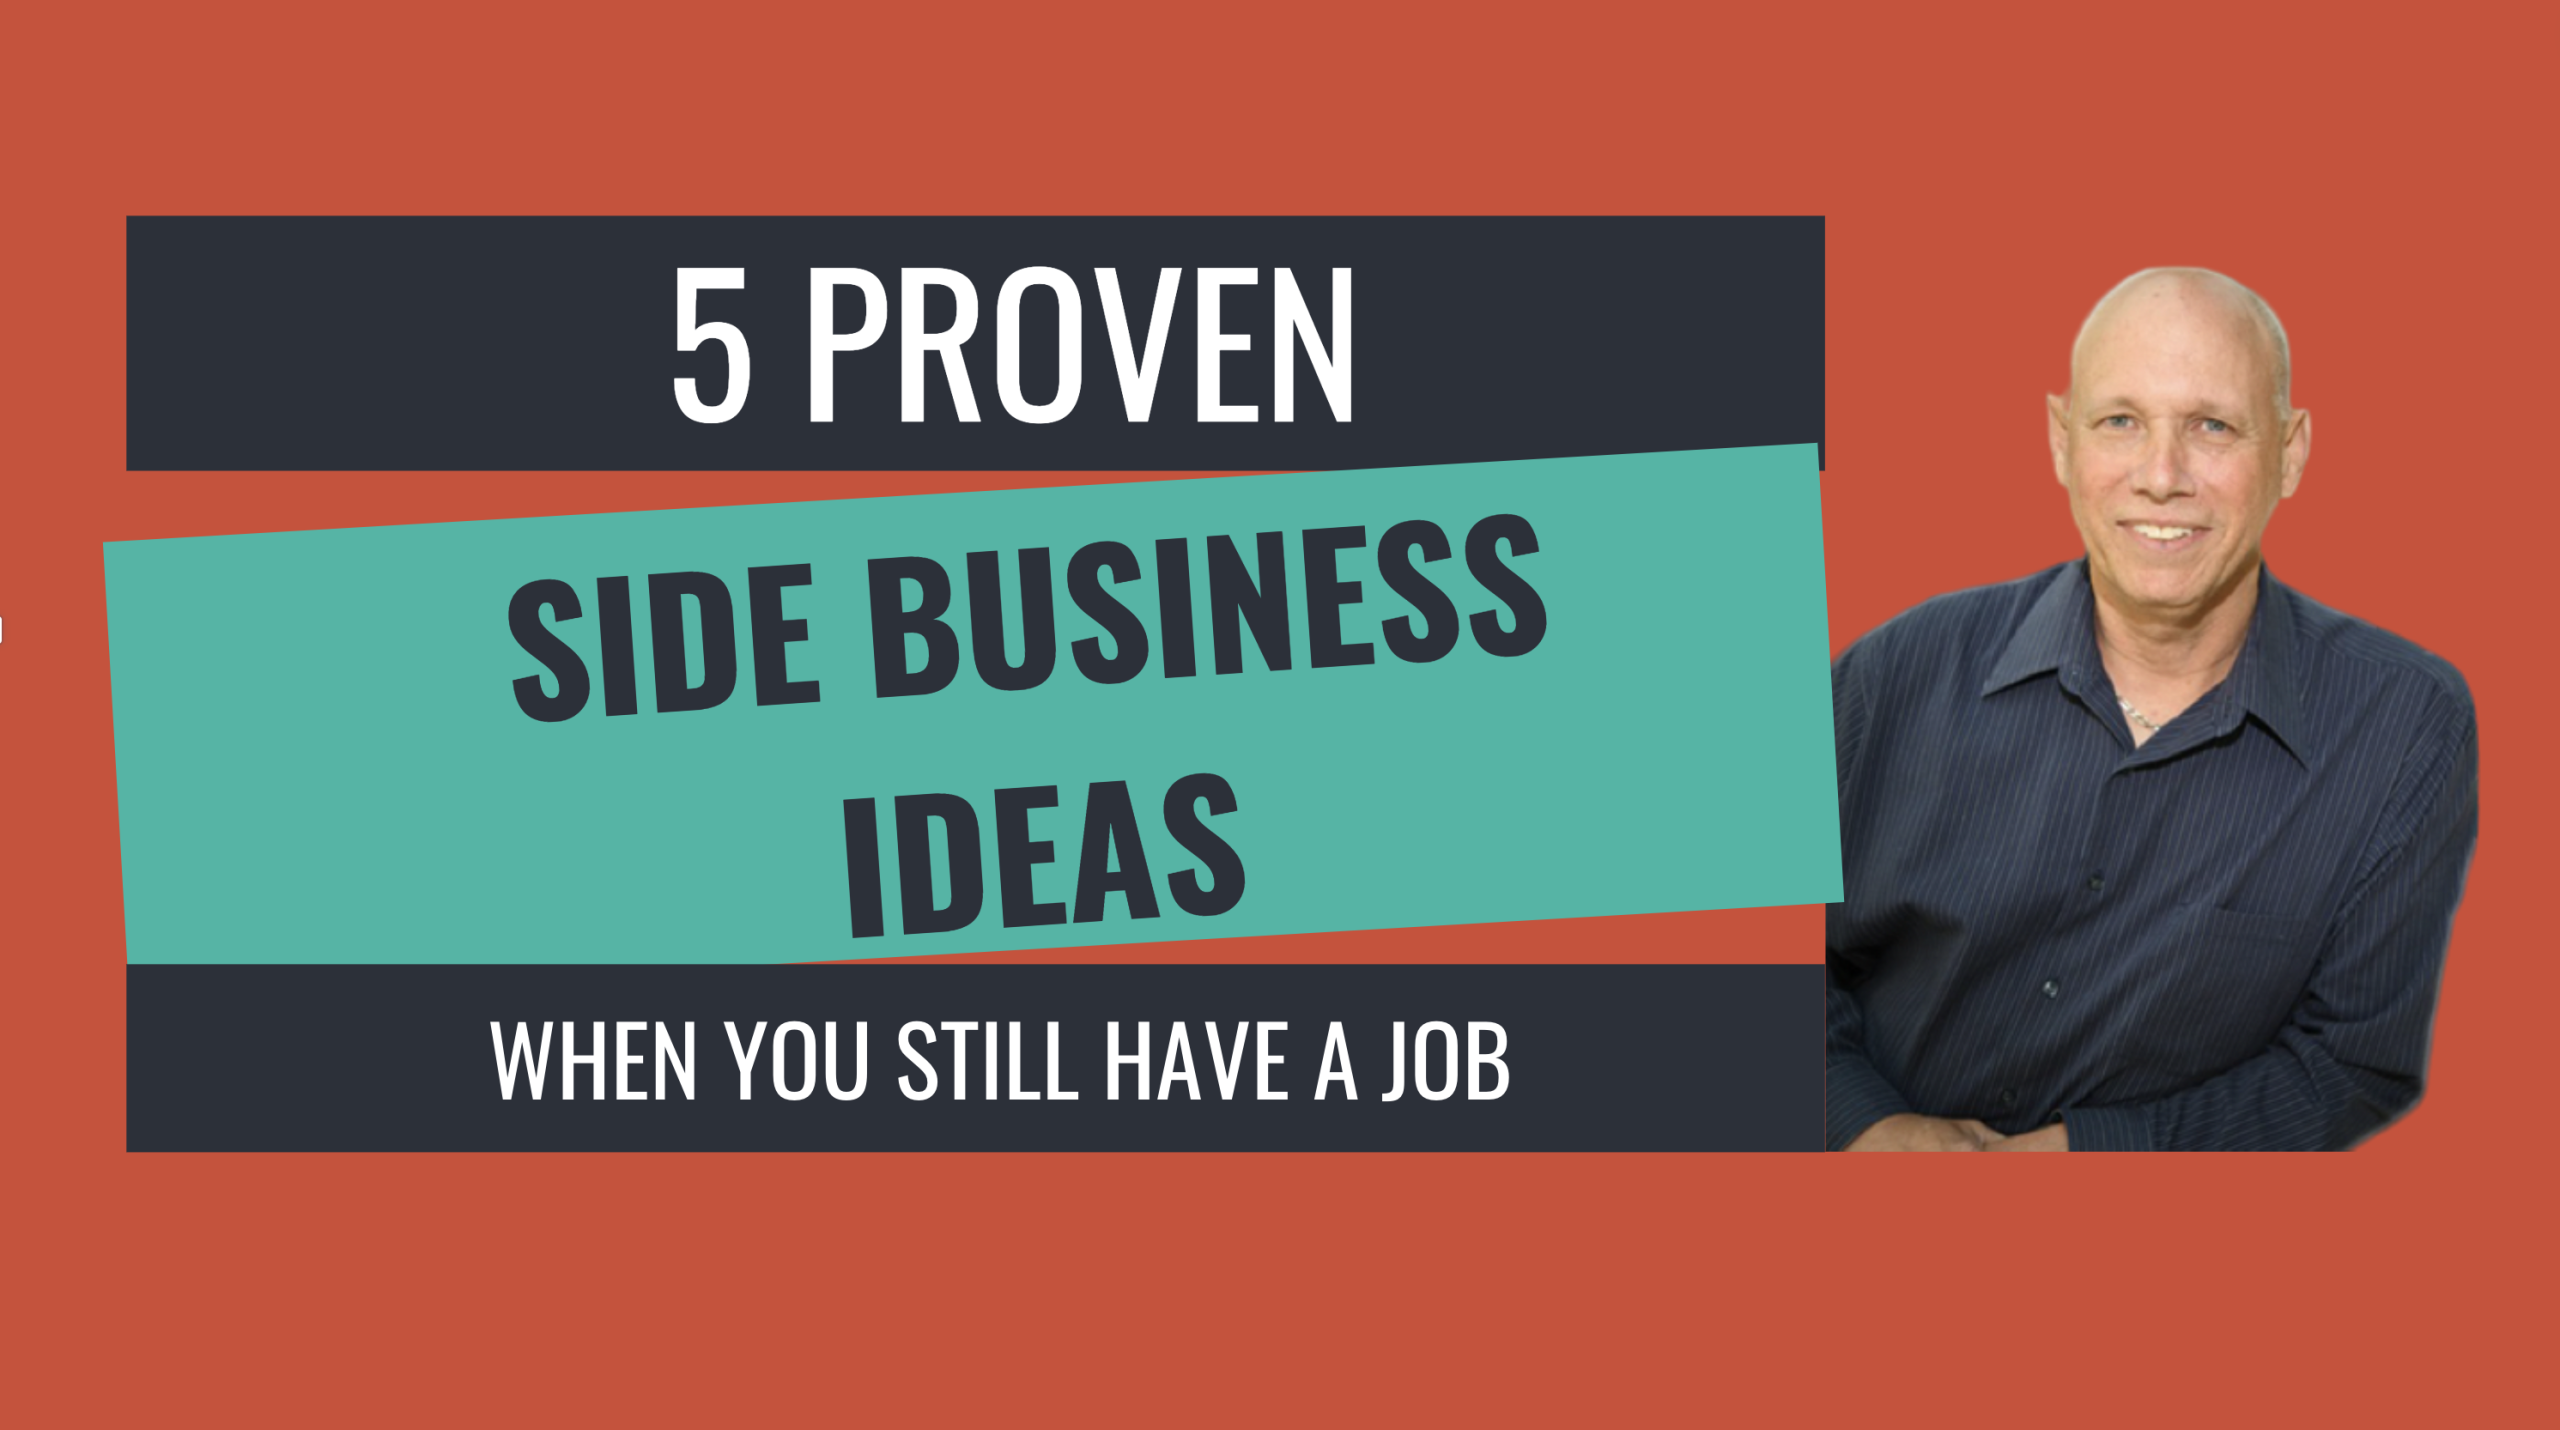 5 Proven Side Business Ideas When You Still Have A Job